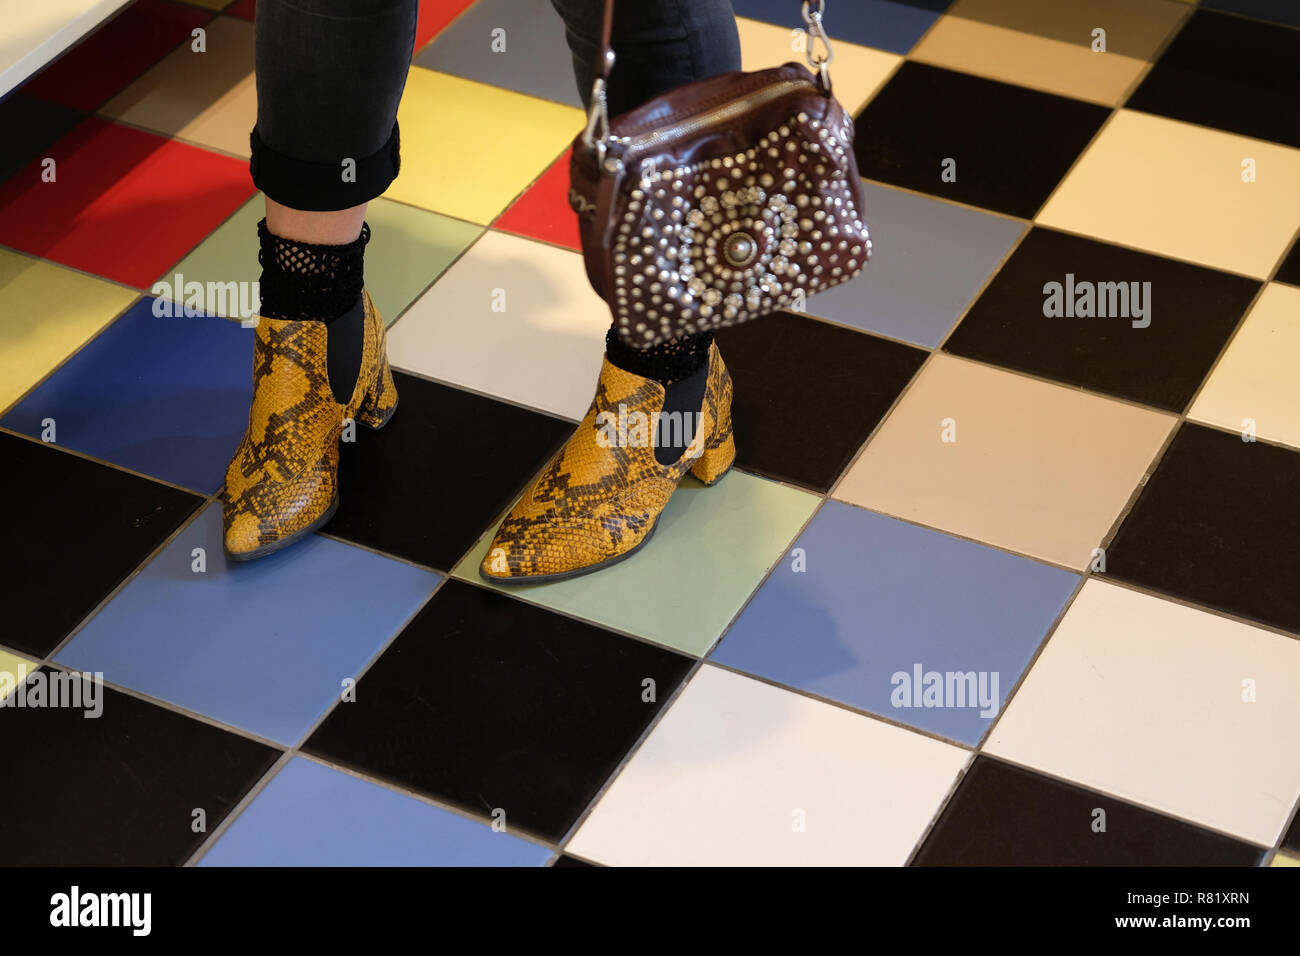 Snake shoes on colorful tiles Stock Photo